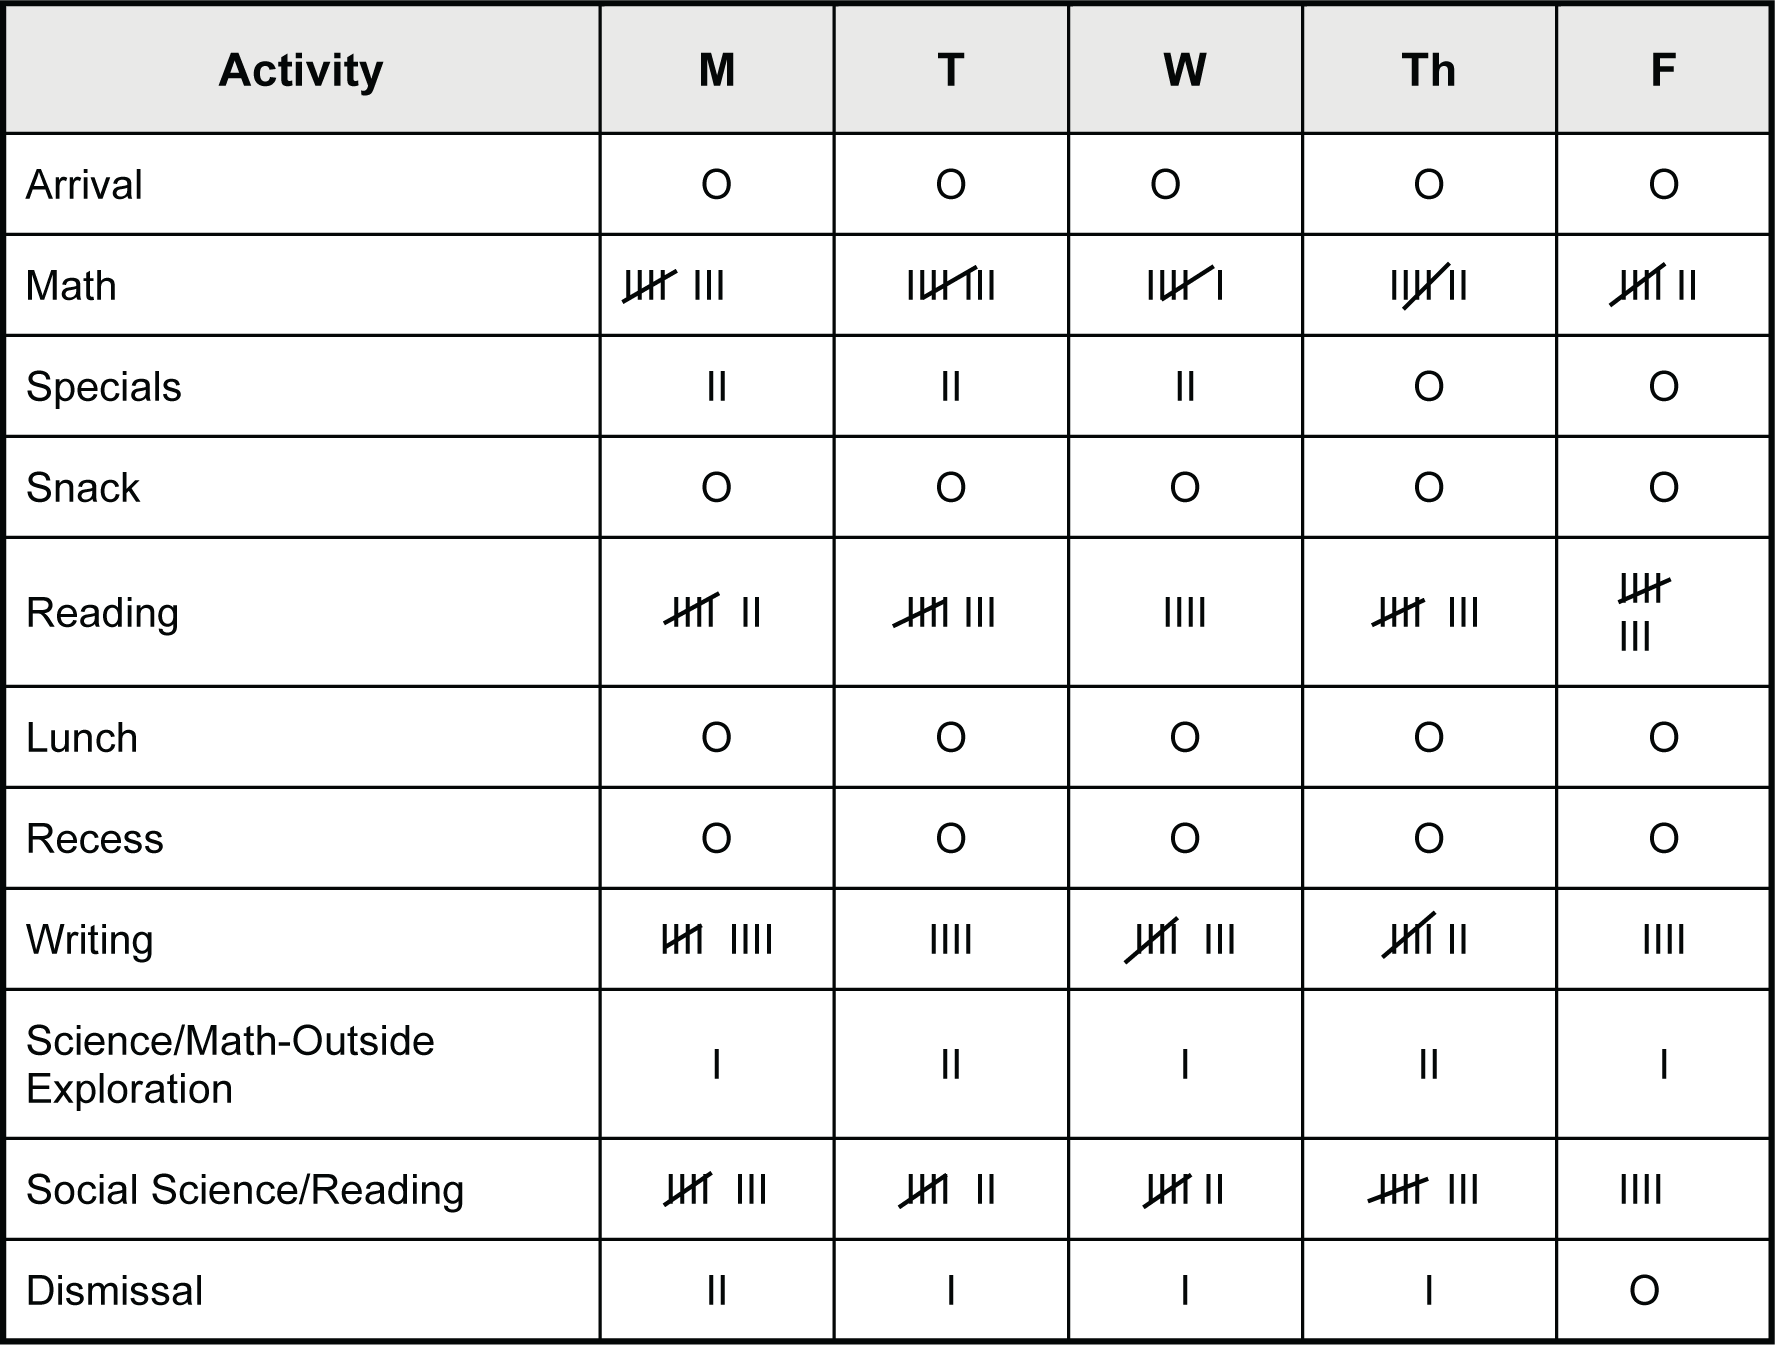 a table representing the frequency to which Joey engages in disruptive classroom behavior